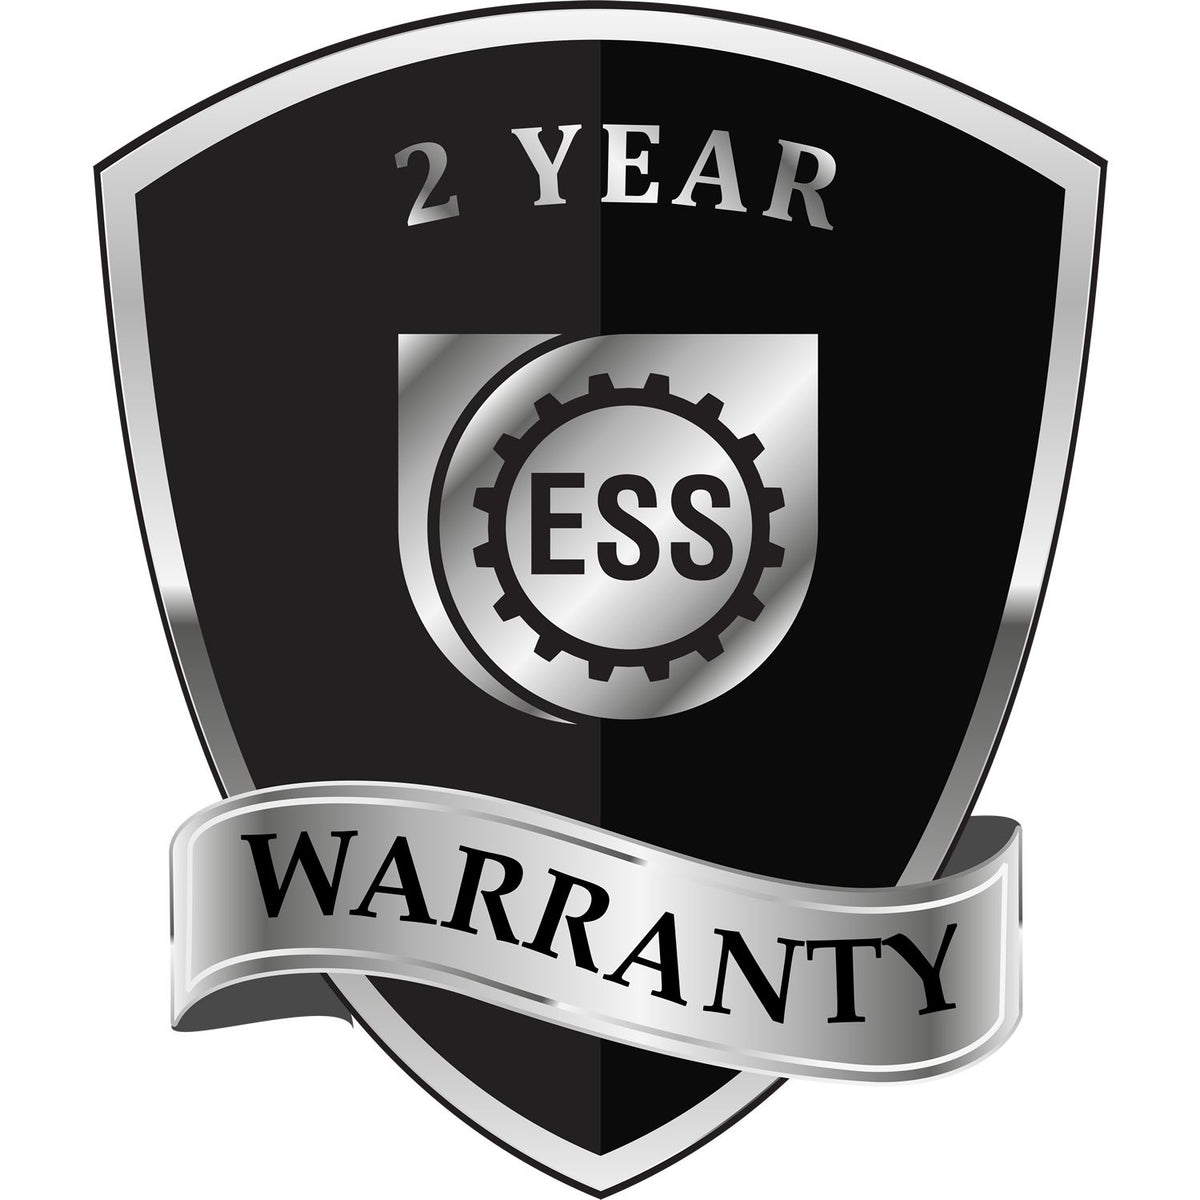 A badge or emblem showing a warranty icon for the Heavy Duty Cast Iron Ohio Engineer Seal Embosser